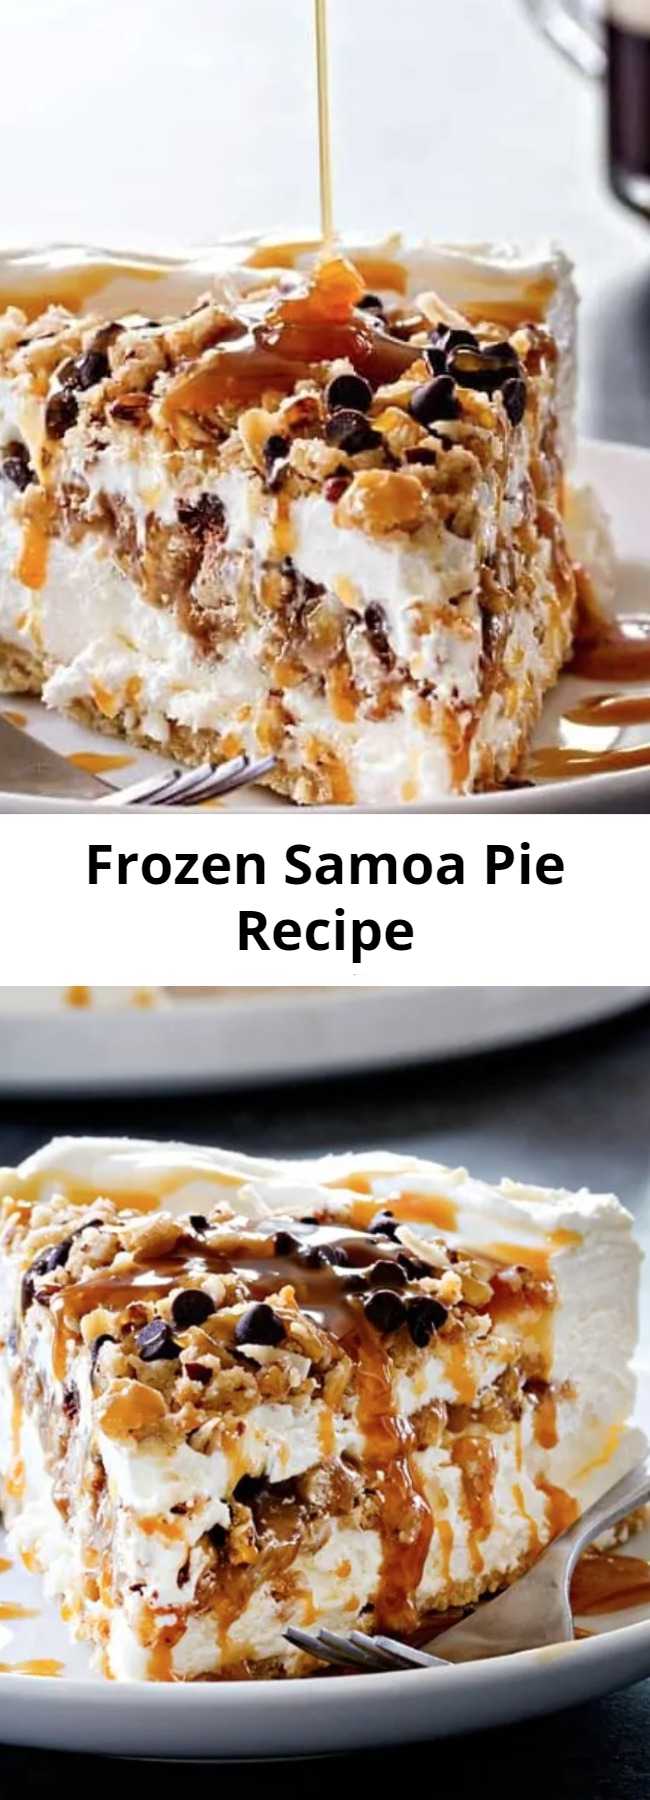 Frozen Samoa Pie Recipe - Frozen Samoa Pie is pretty much a chocolate-caramel-coconut lover’s dream. Layers upon layers of those delectable flavors, in one frozen treat! This is the cold treat you crave on a hot day... You won't be disappointed!